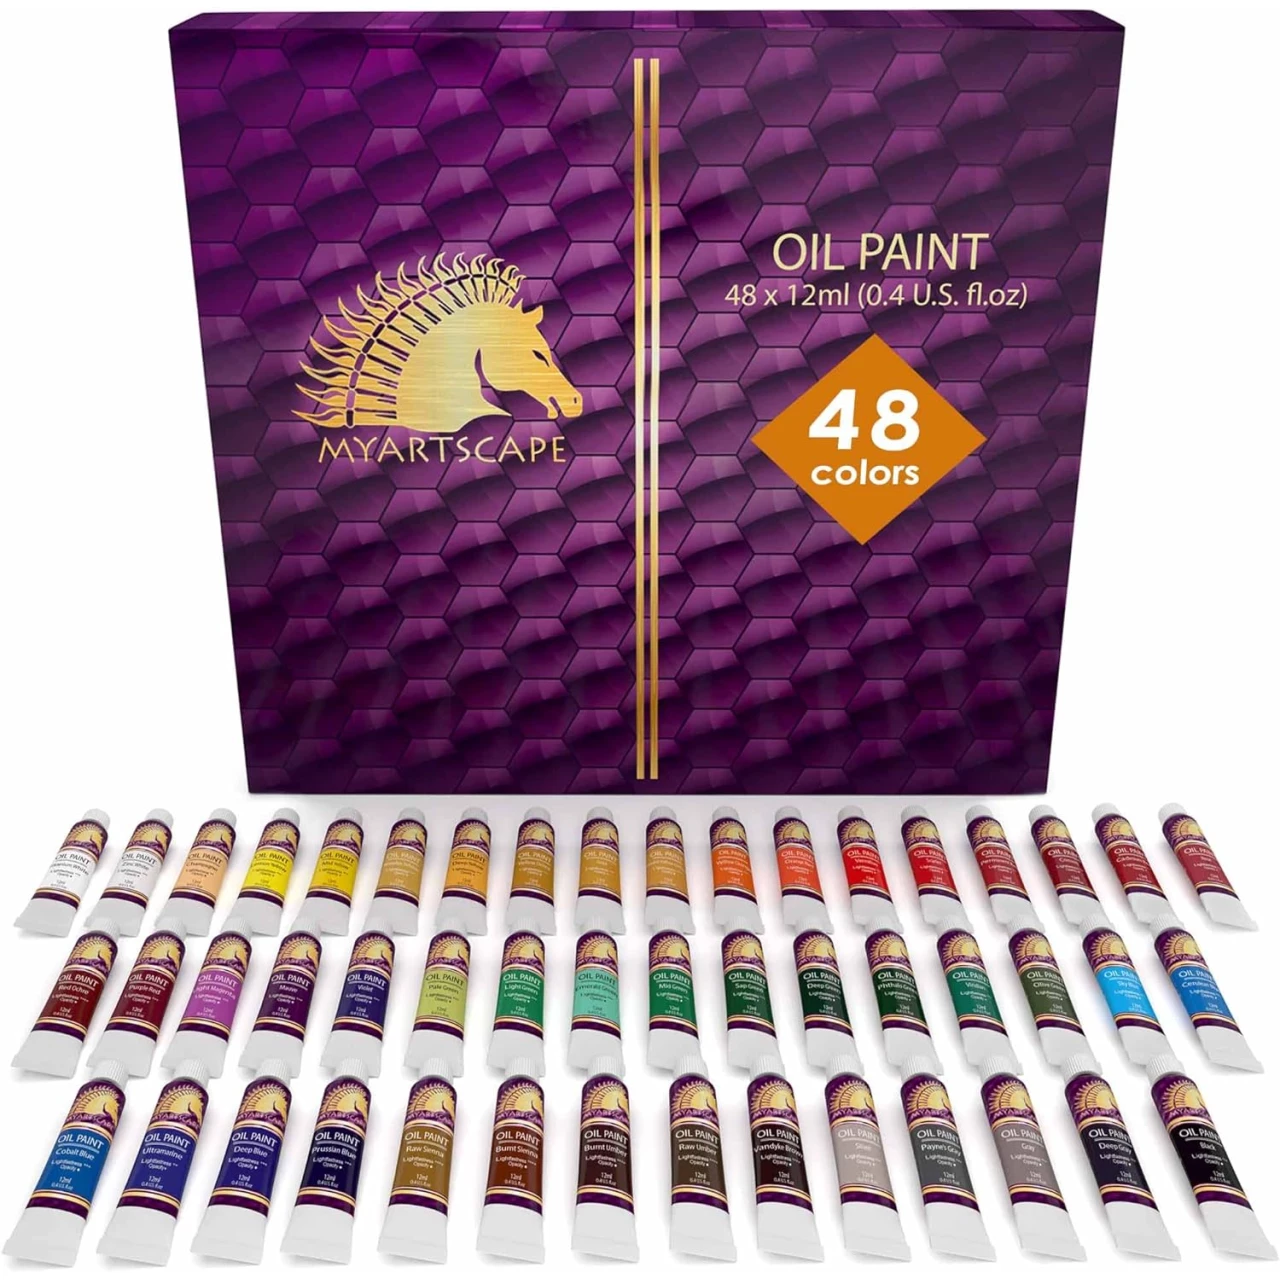 MyArtscape Oil Paint Set - 12ml x 48 Tubes - Lightfast - Heavy Body - Highly Pigmented Oil-based Colors - Excellent Coverage - Artist Quality Painting Supplies - Professional Craft Paints